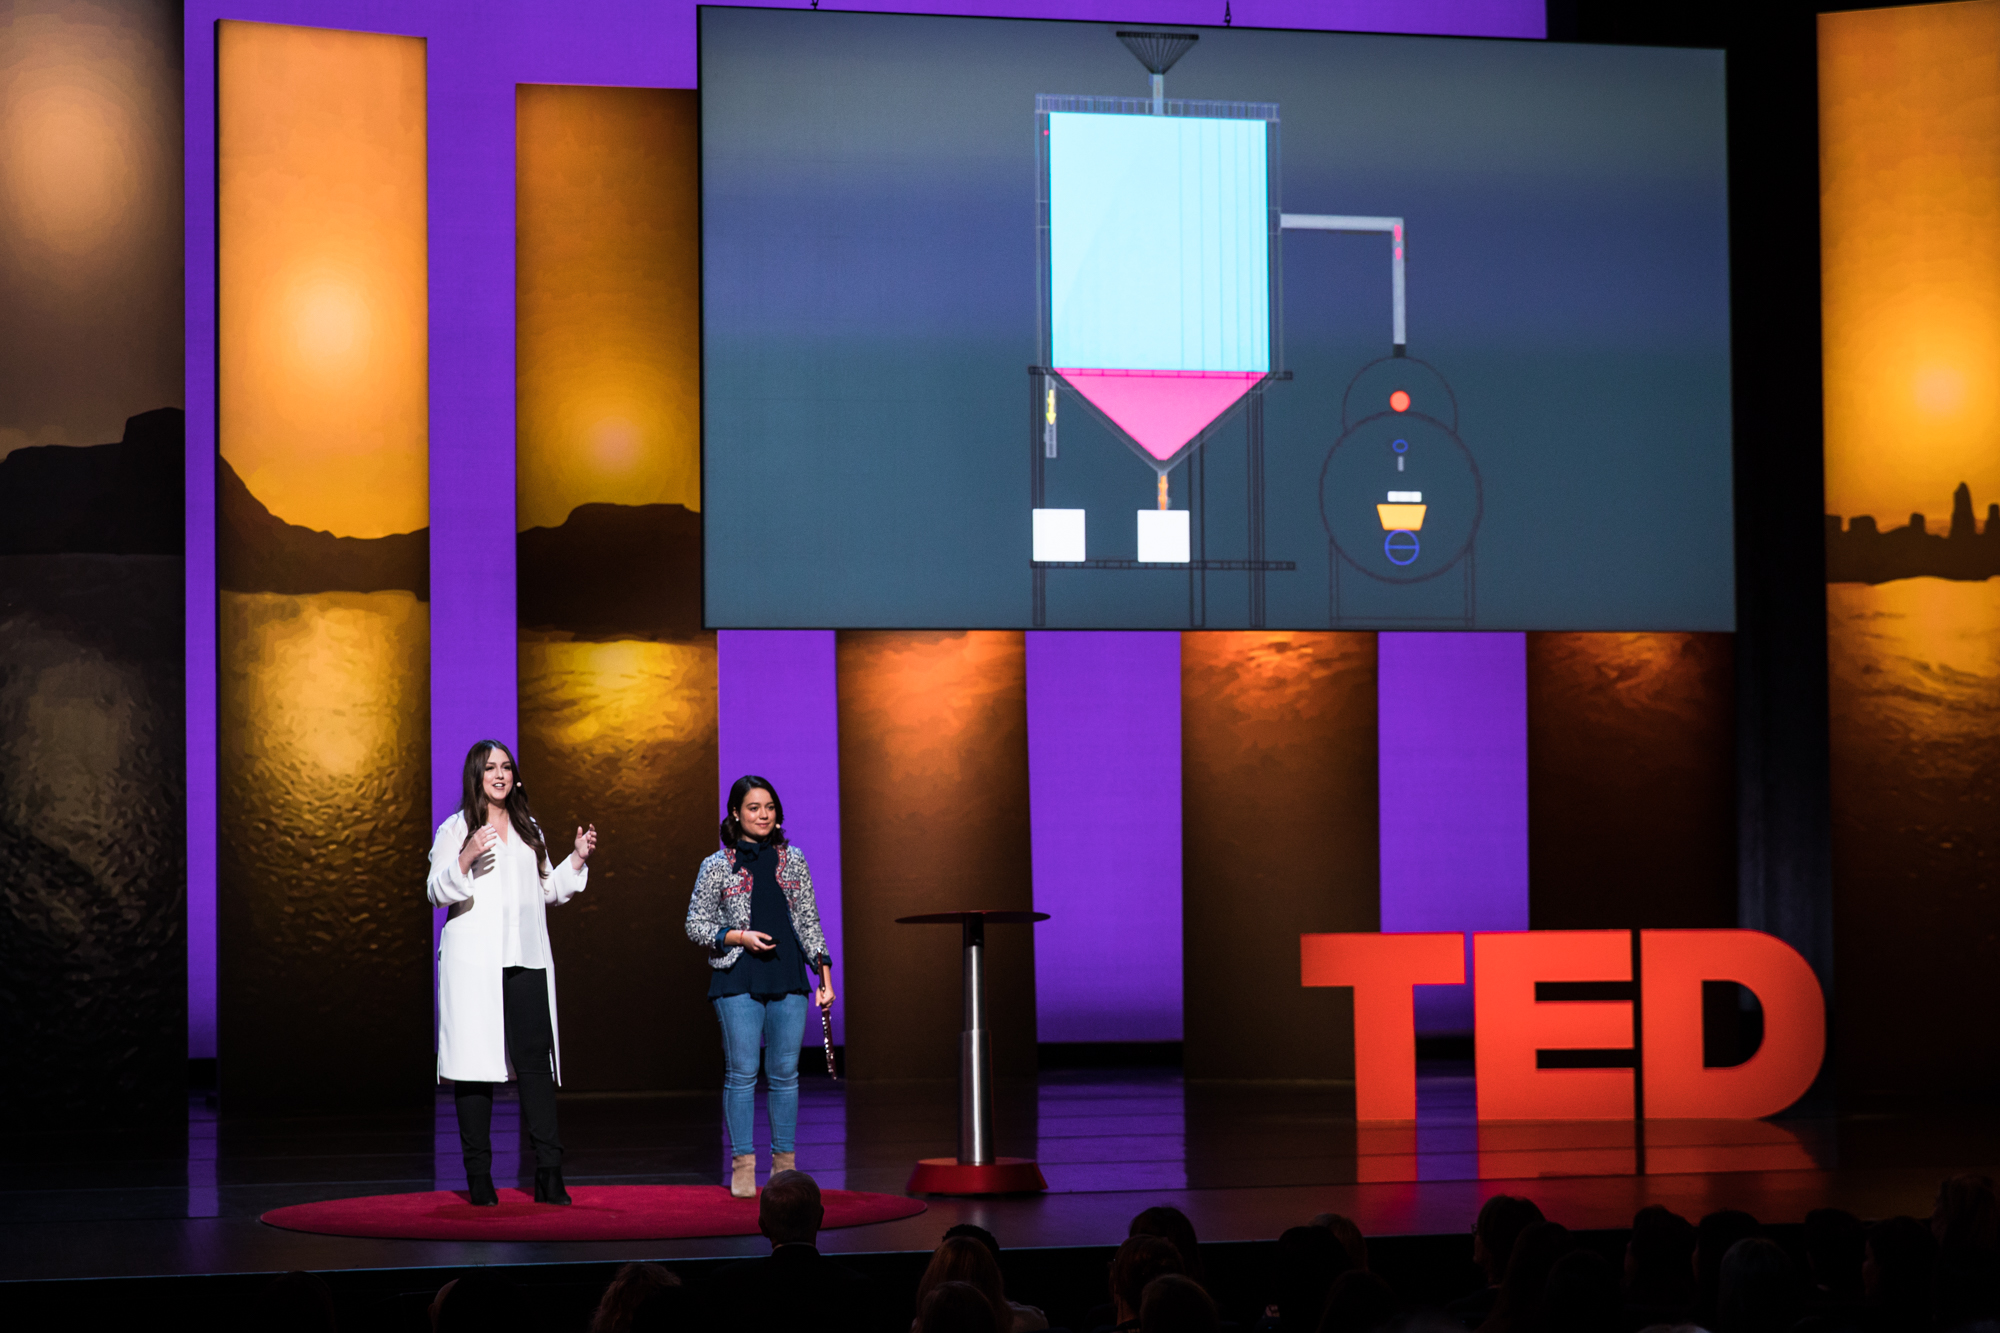 Anela Arifi and Ilda Ismaili at TEDWomen 2016 - It's About Time, October 26-28, 2016, Yerba Buena Centre for the Arts, San Francisco, California. Photo: Marla Aufmuth / TED